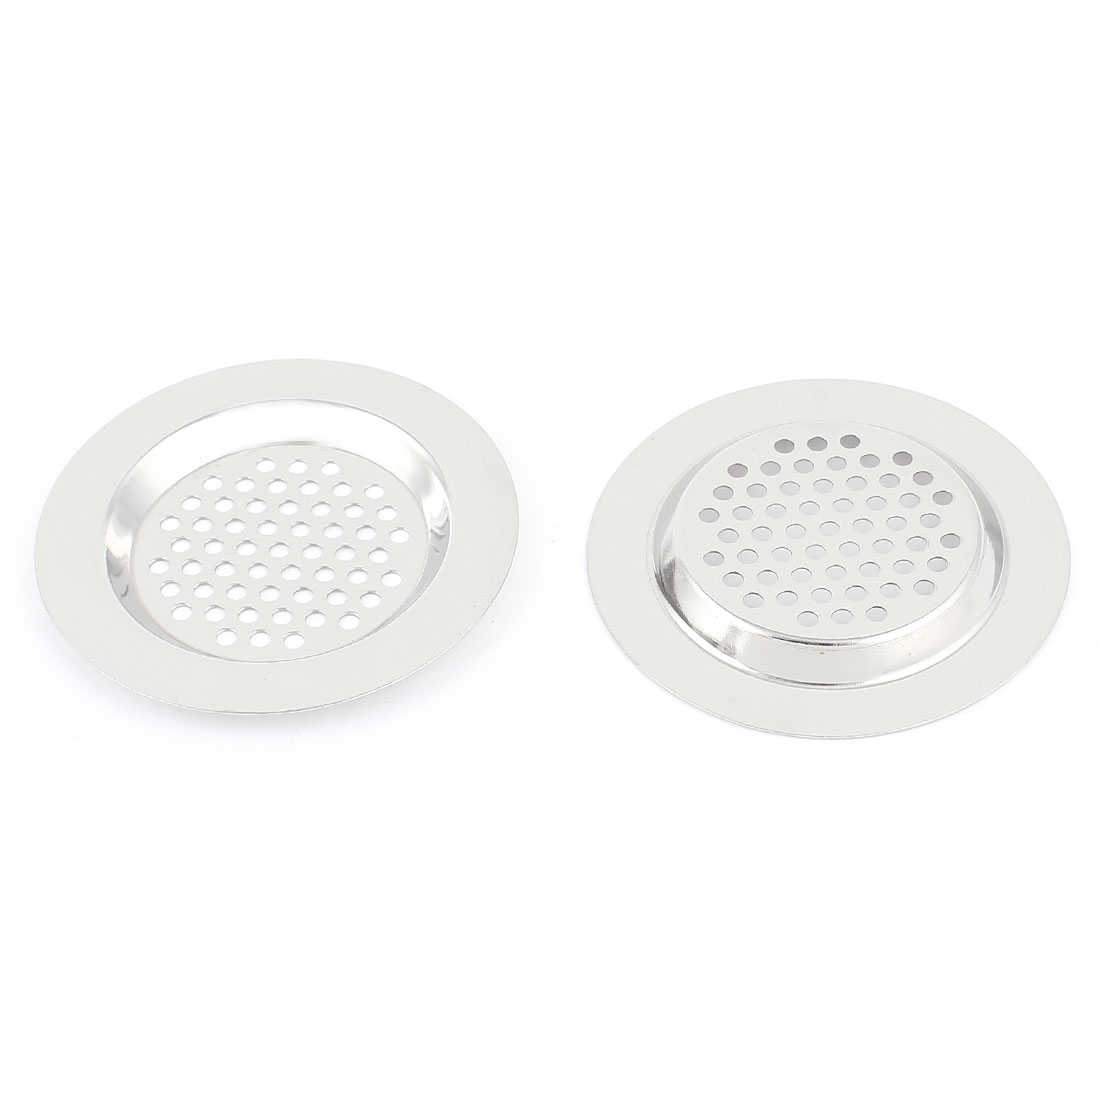 3' Dia Stainless Steel Sink Strainer Waste Drain Stopper Filter 2 Pcs